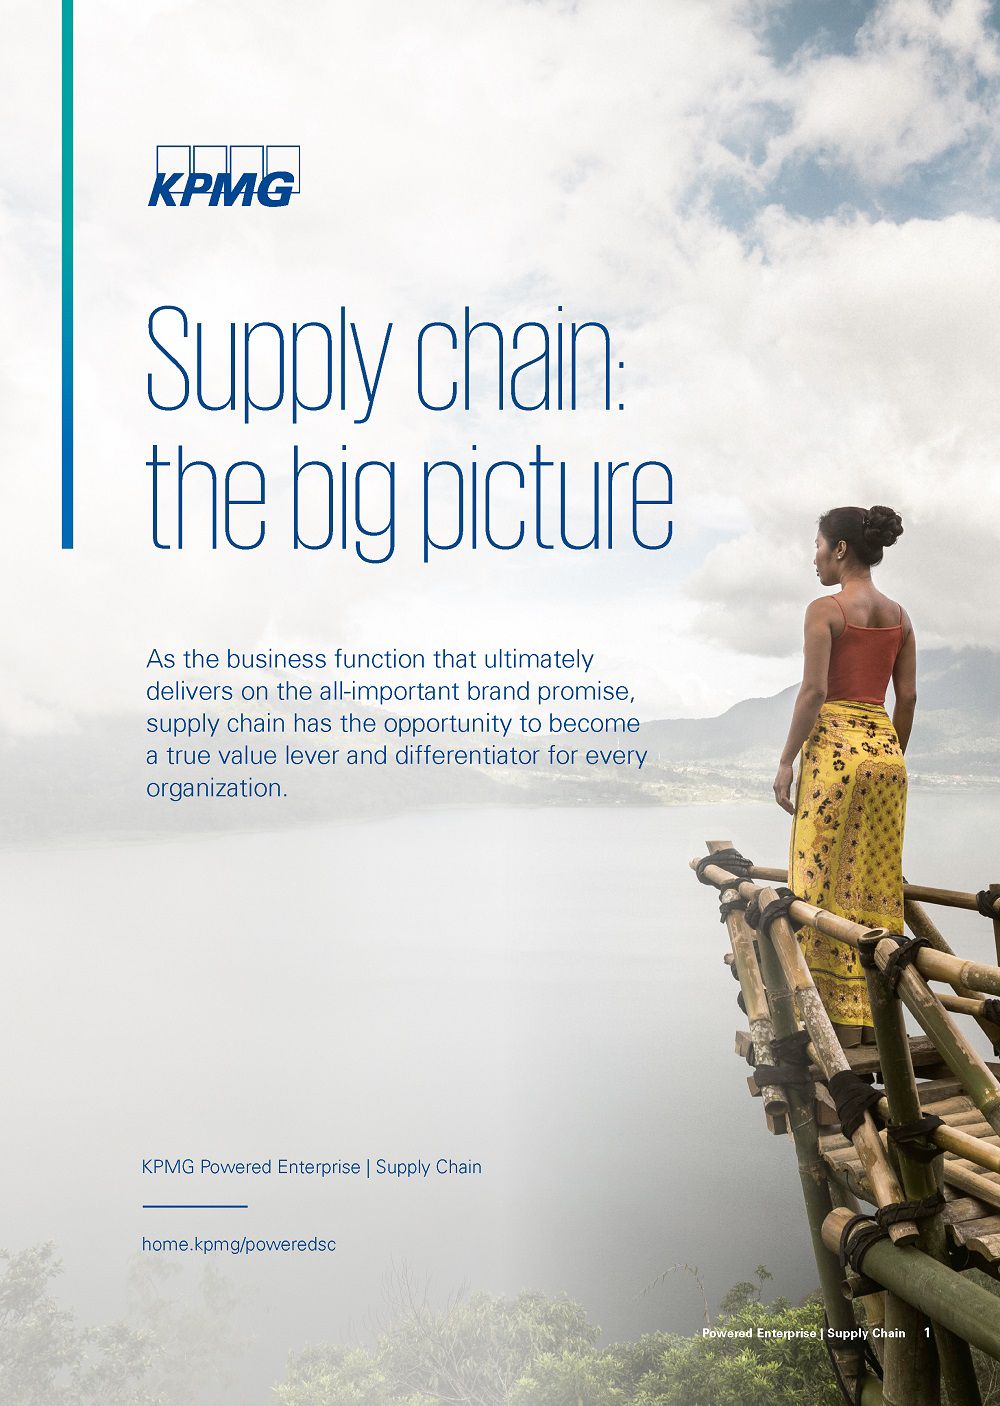 Supply chain: the big picture